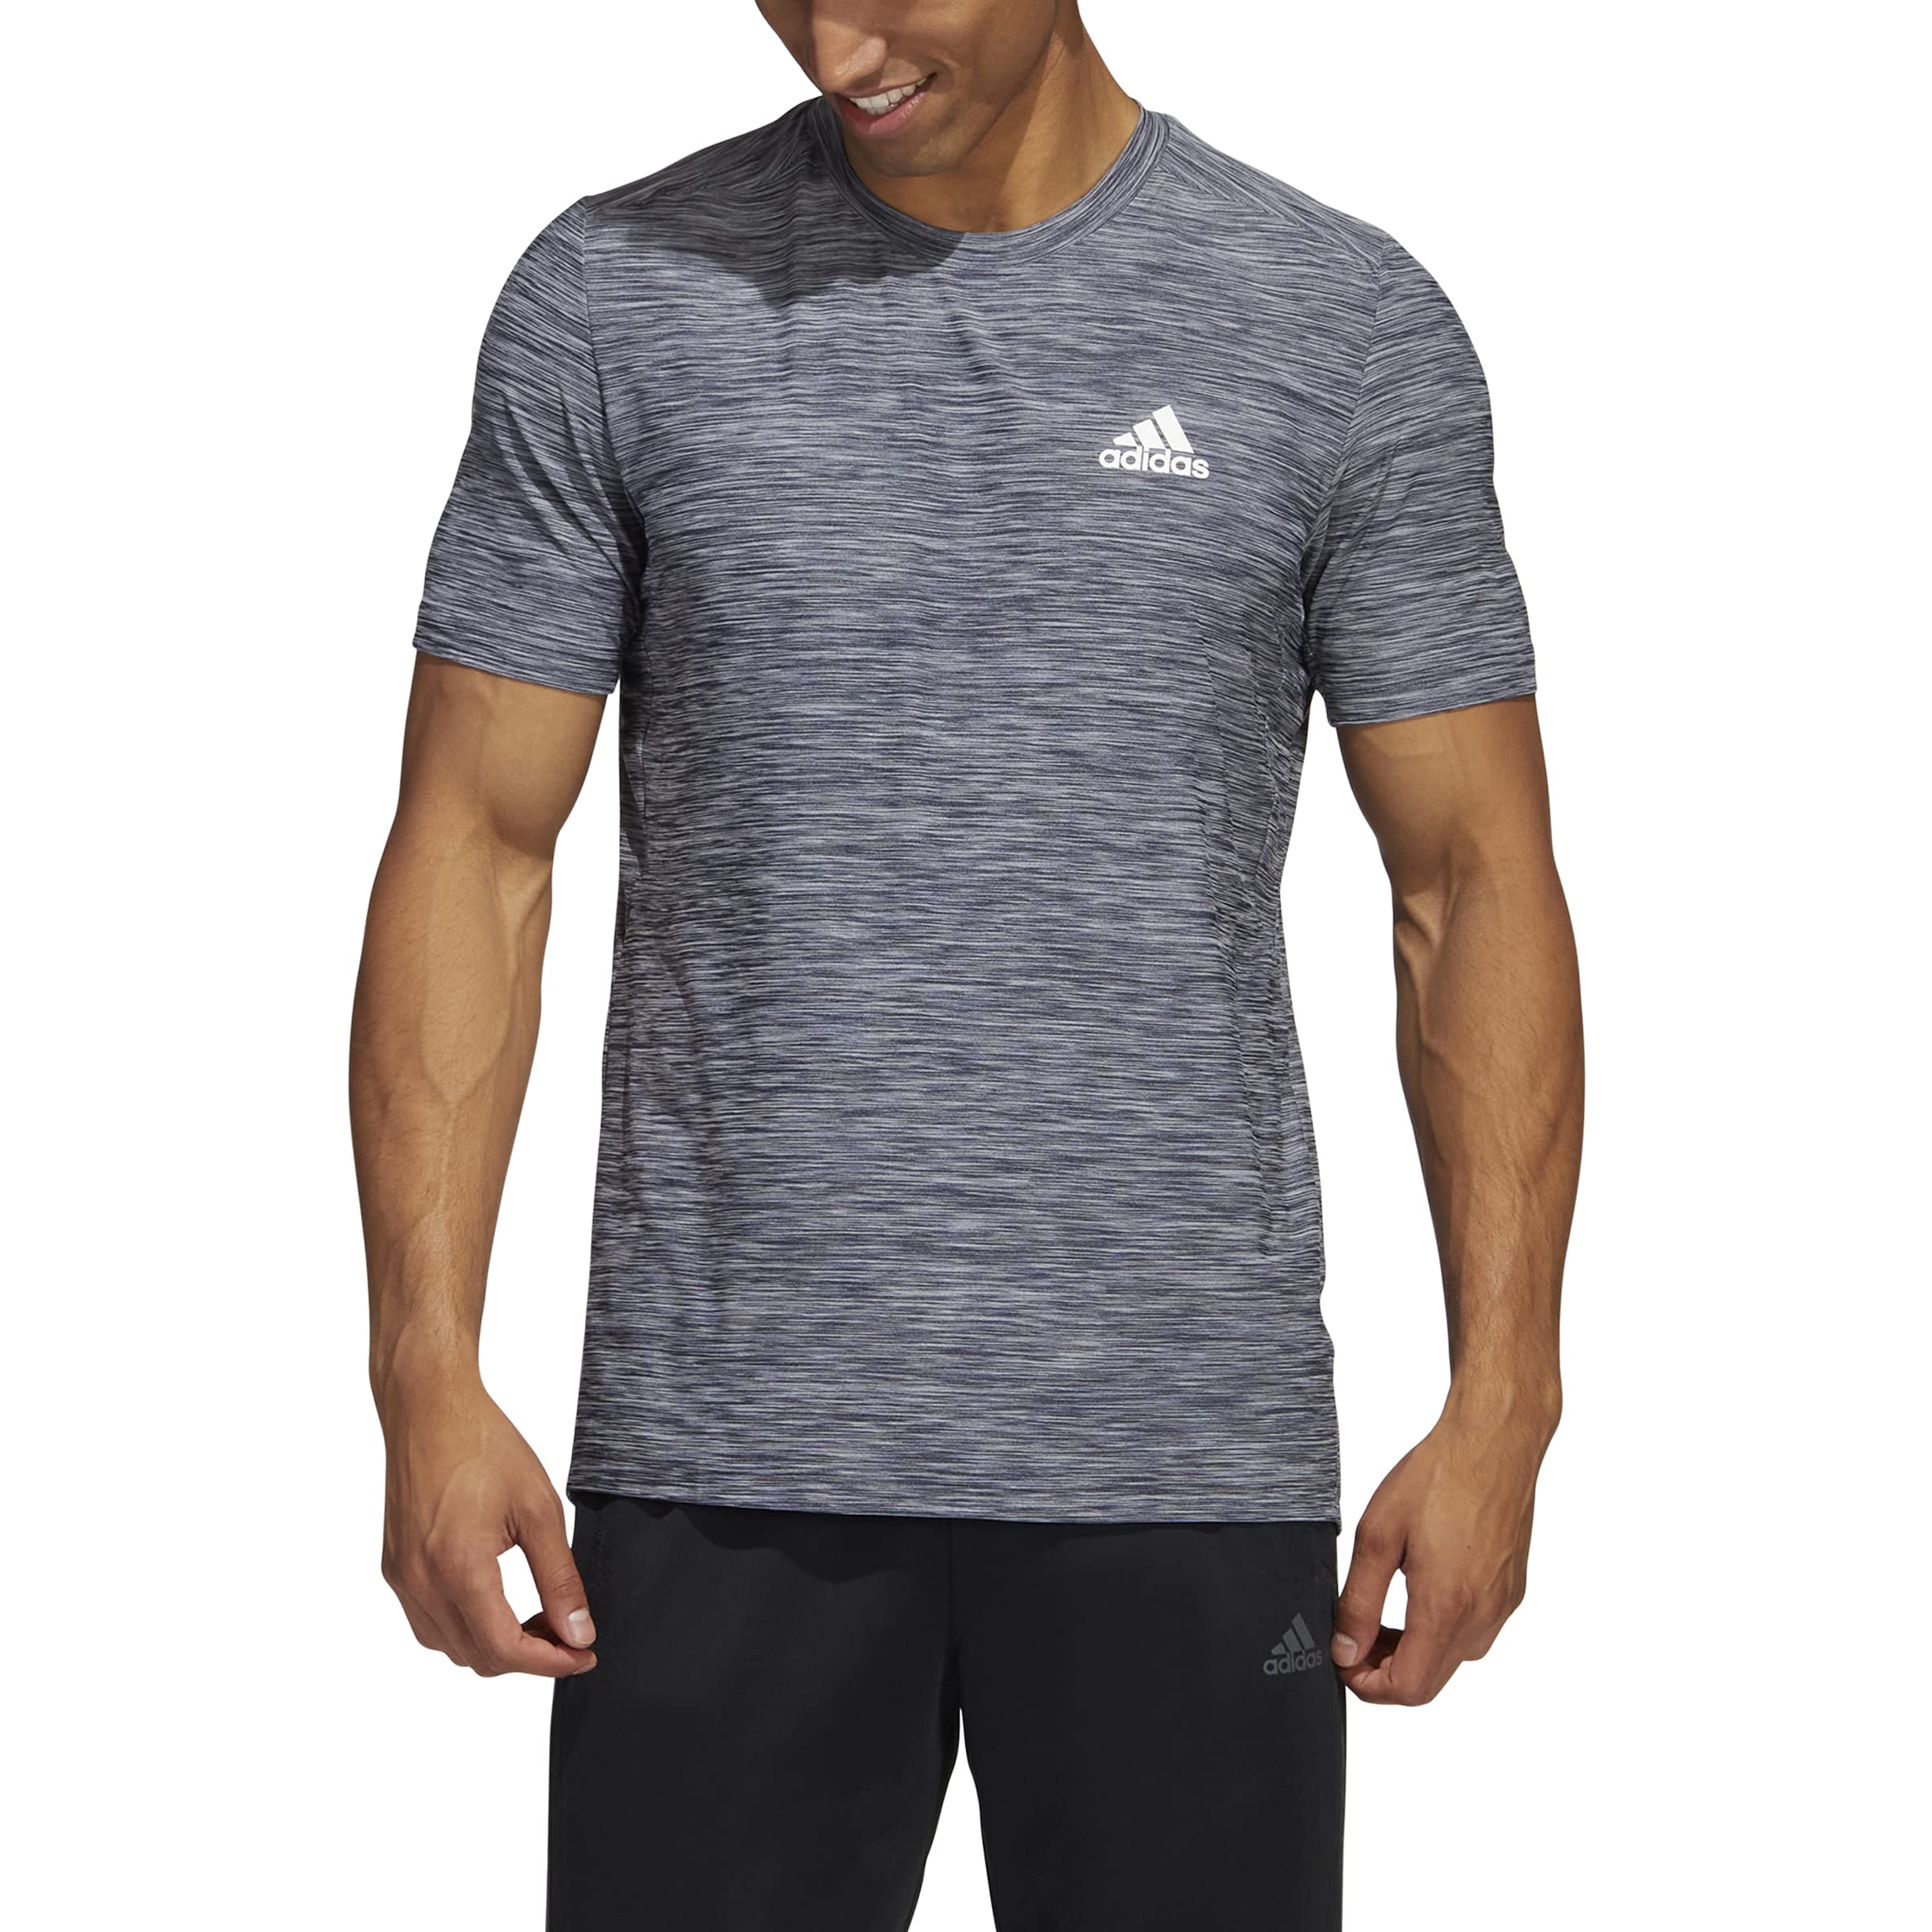 adidas Men's Aeroready Designed 2 Move Sport Stretch Tee, List Price is $25, Now Only $10, You Save $15